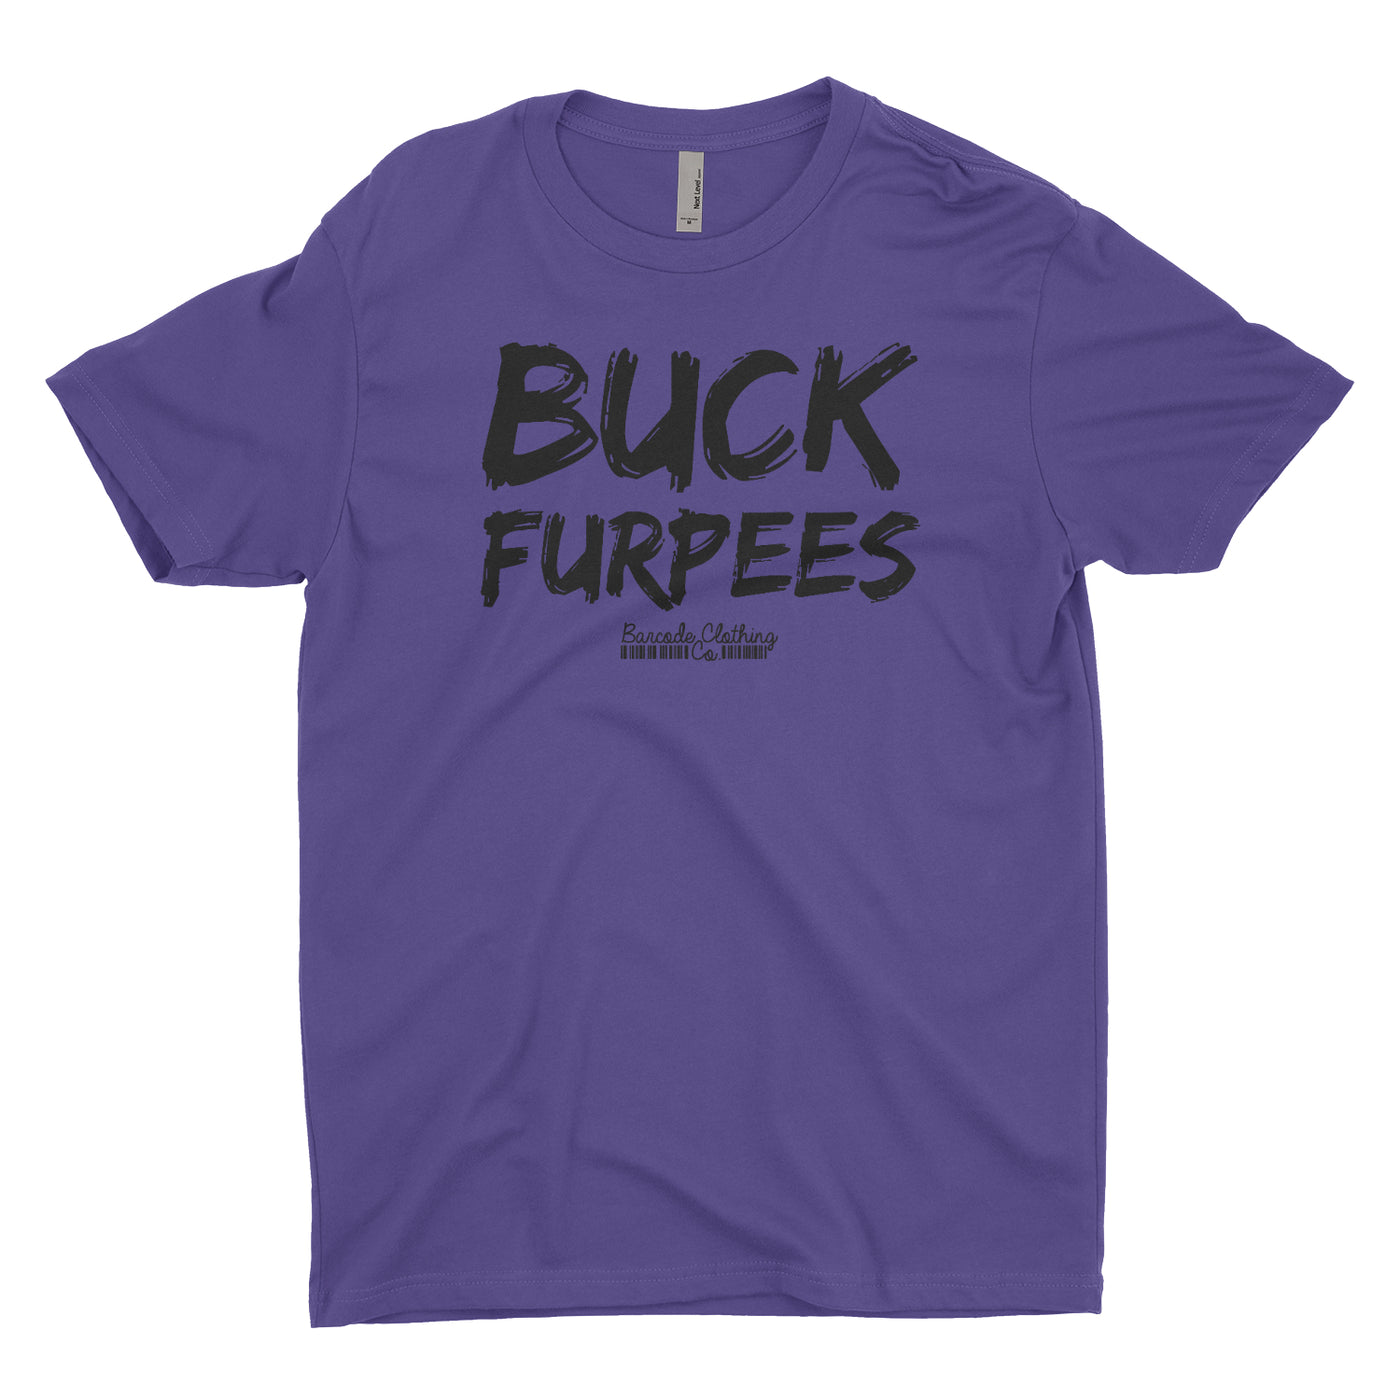 Buck Furpees Blacked Out